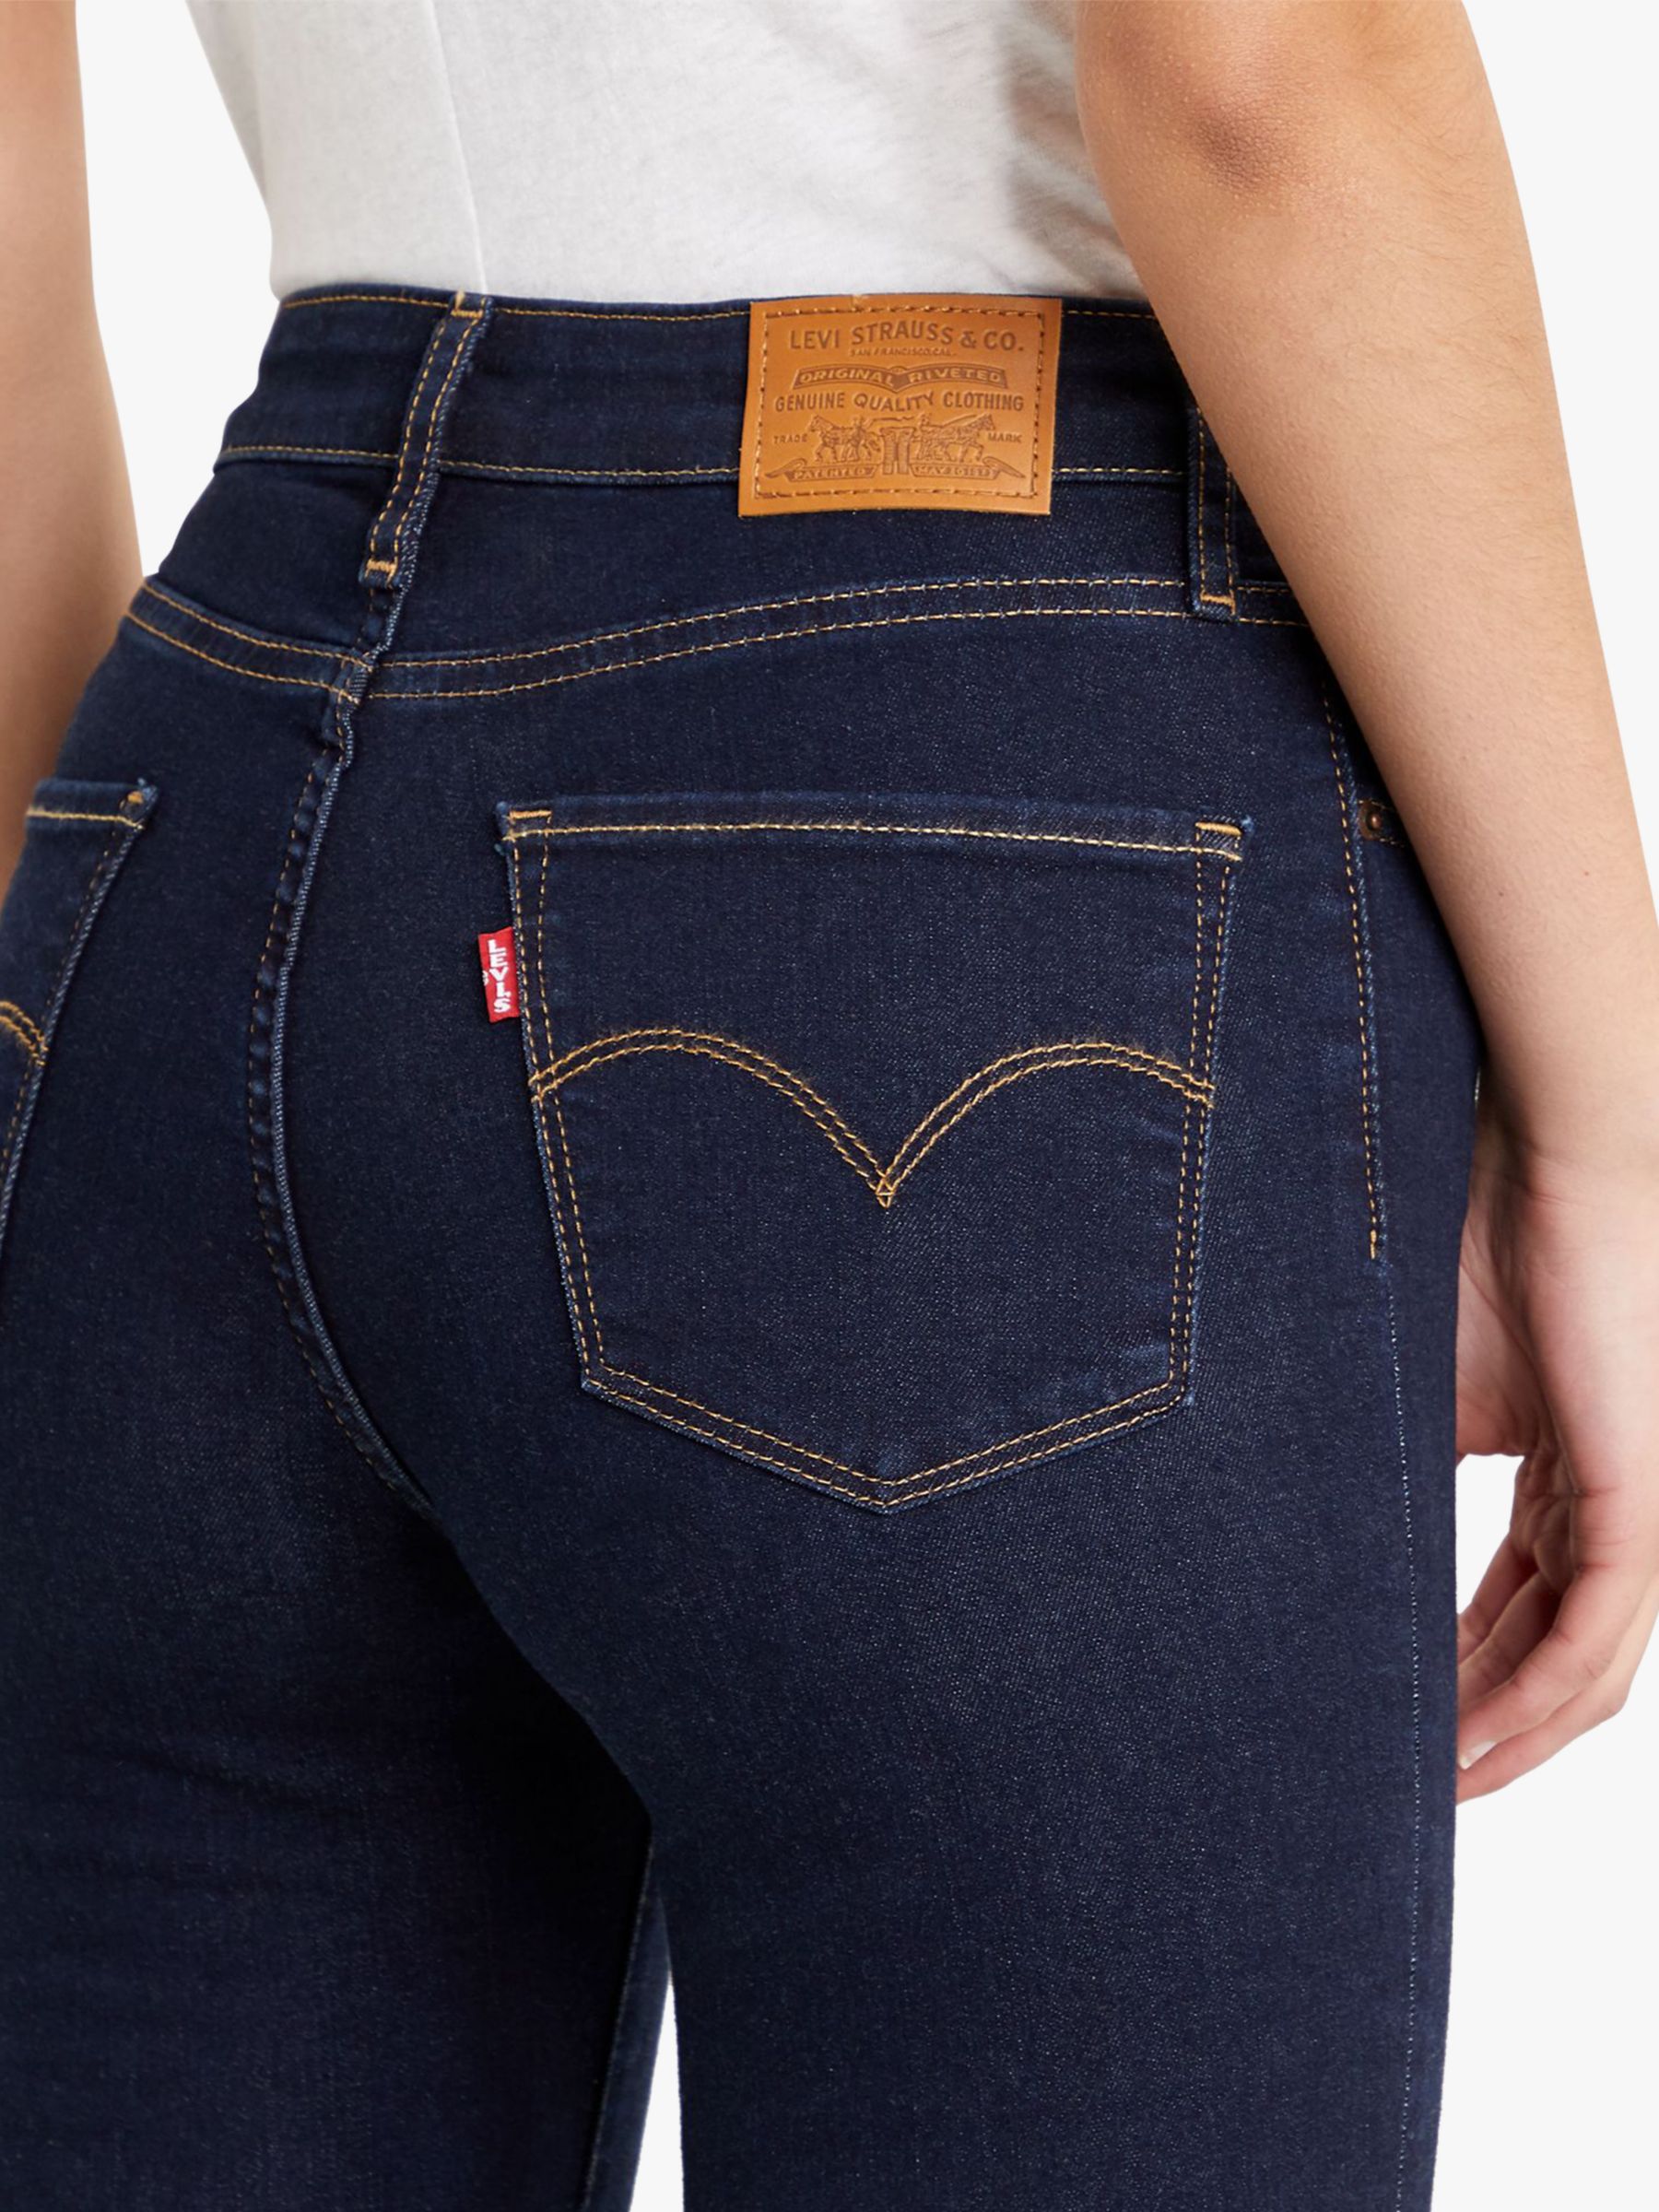 Levi's 725 High Rise Boot Cut Jeans, To The Nine at John Lewis & Partners